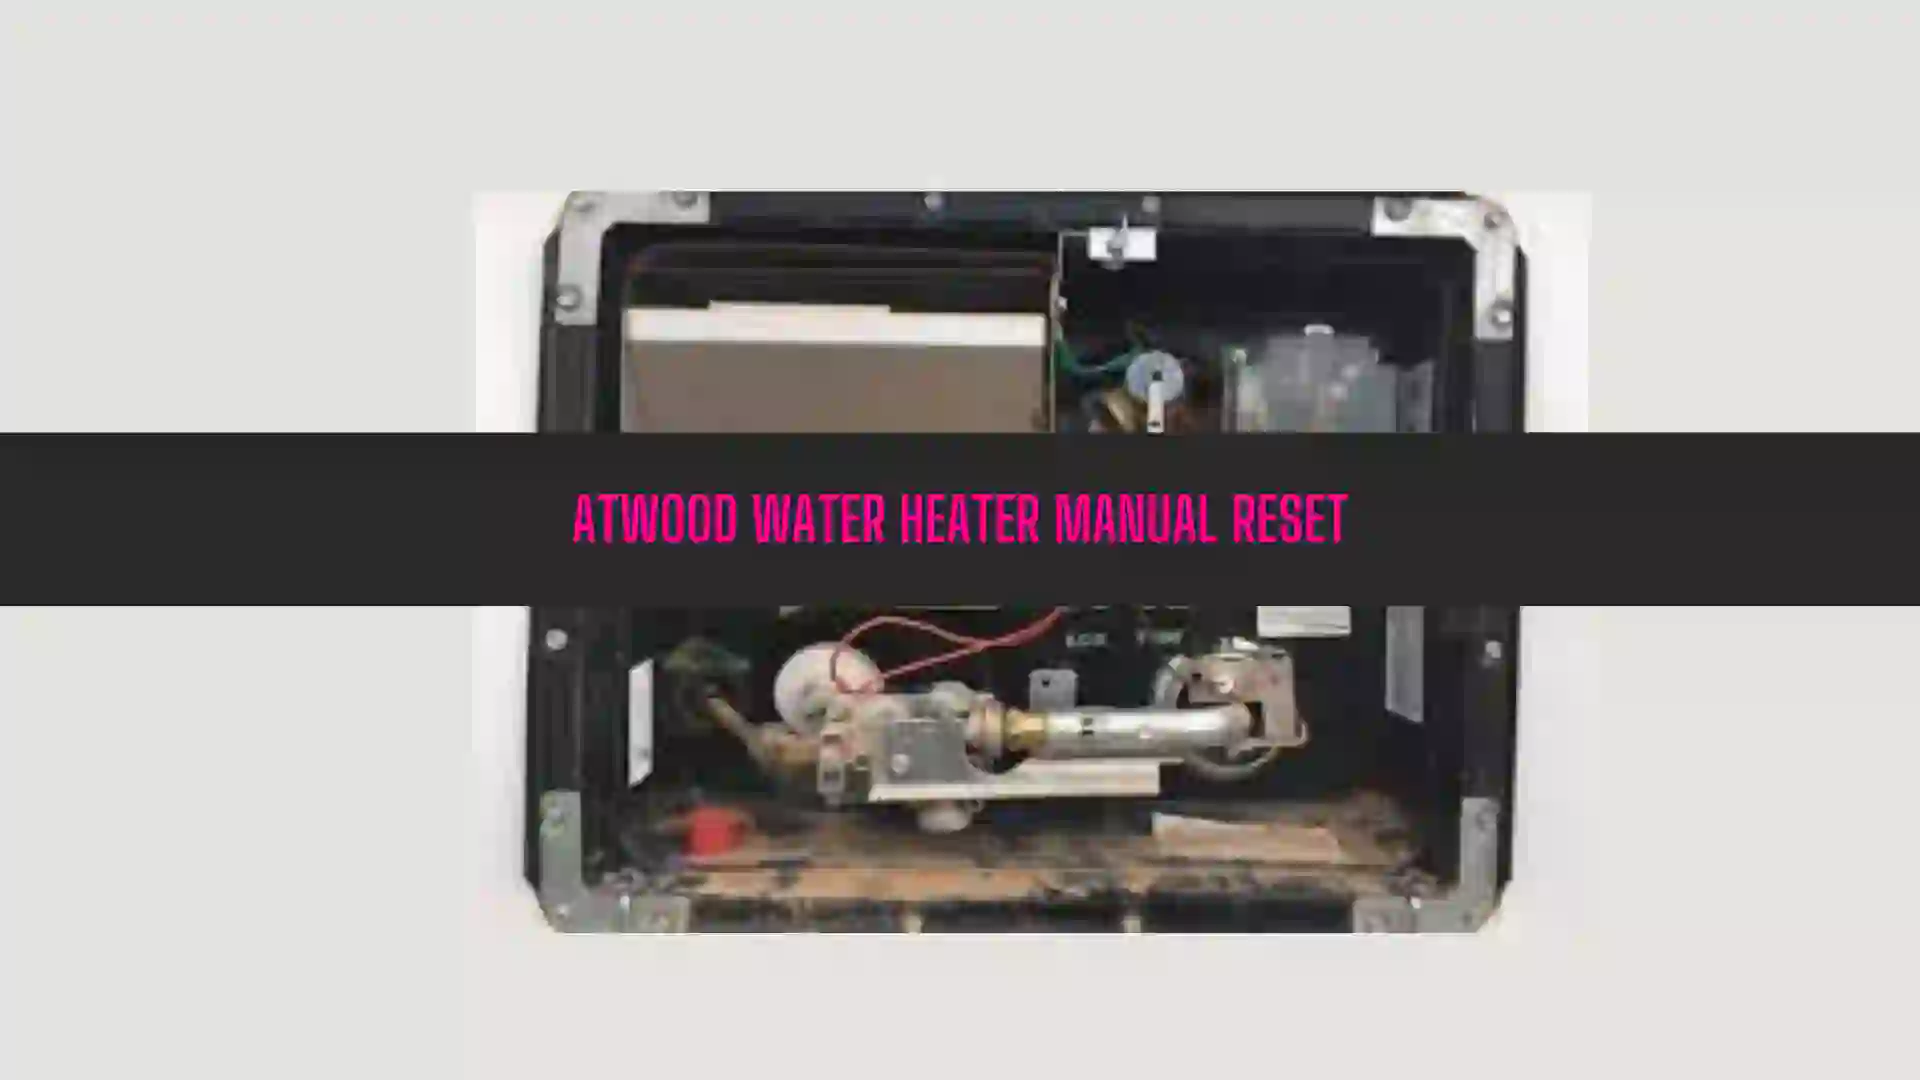 Atwood Water Heater Manual Reset